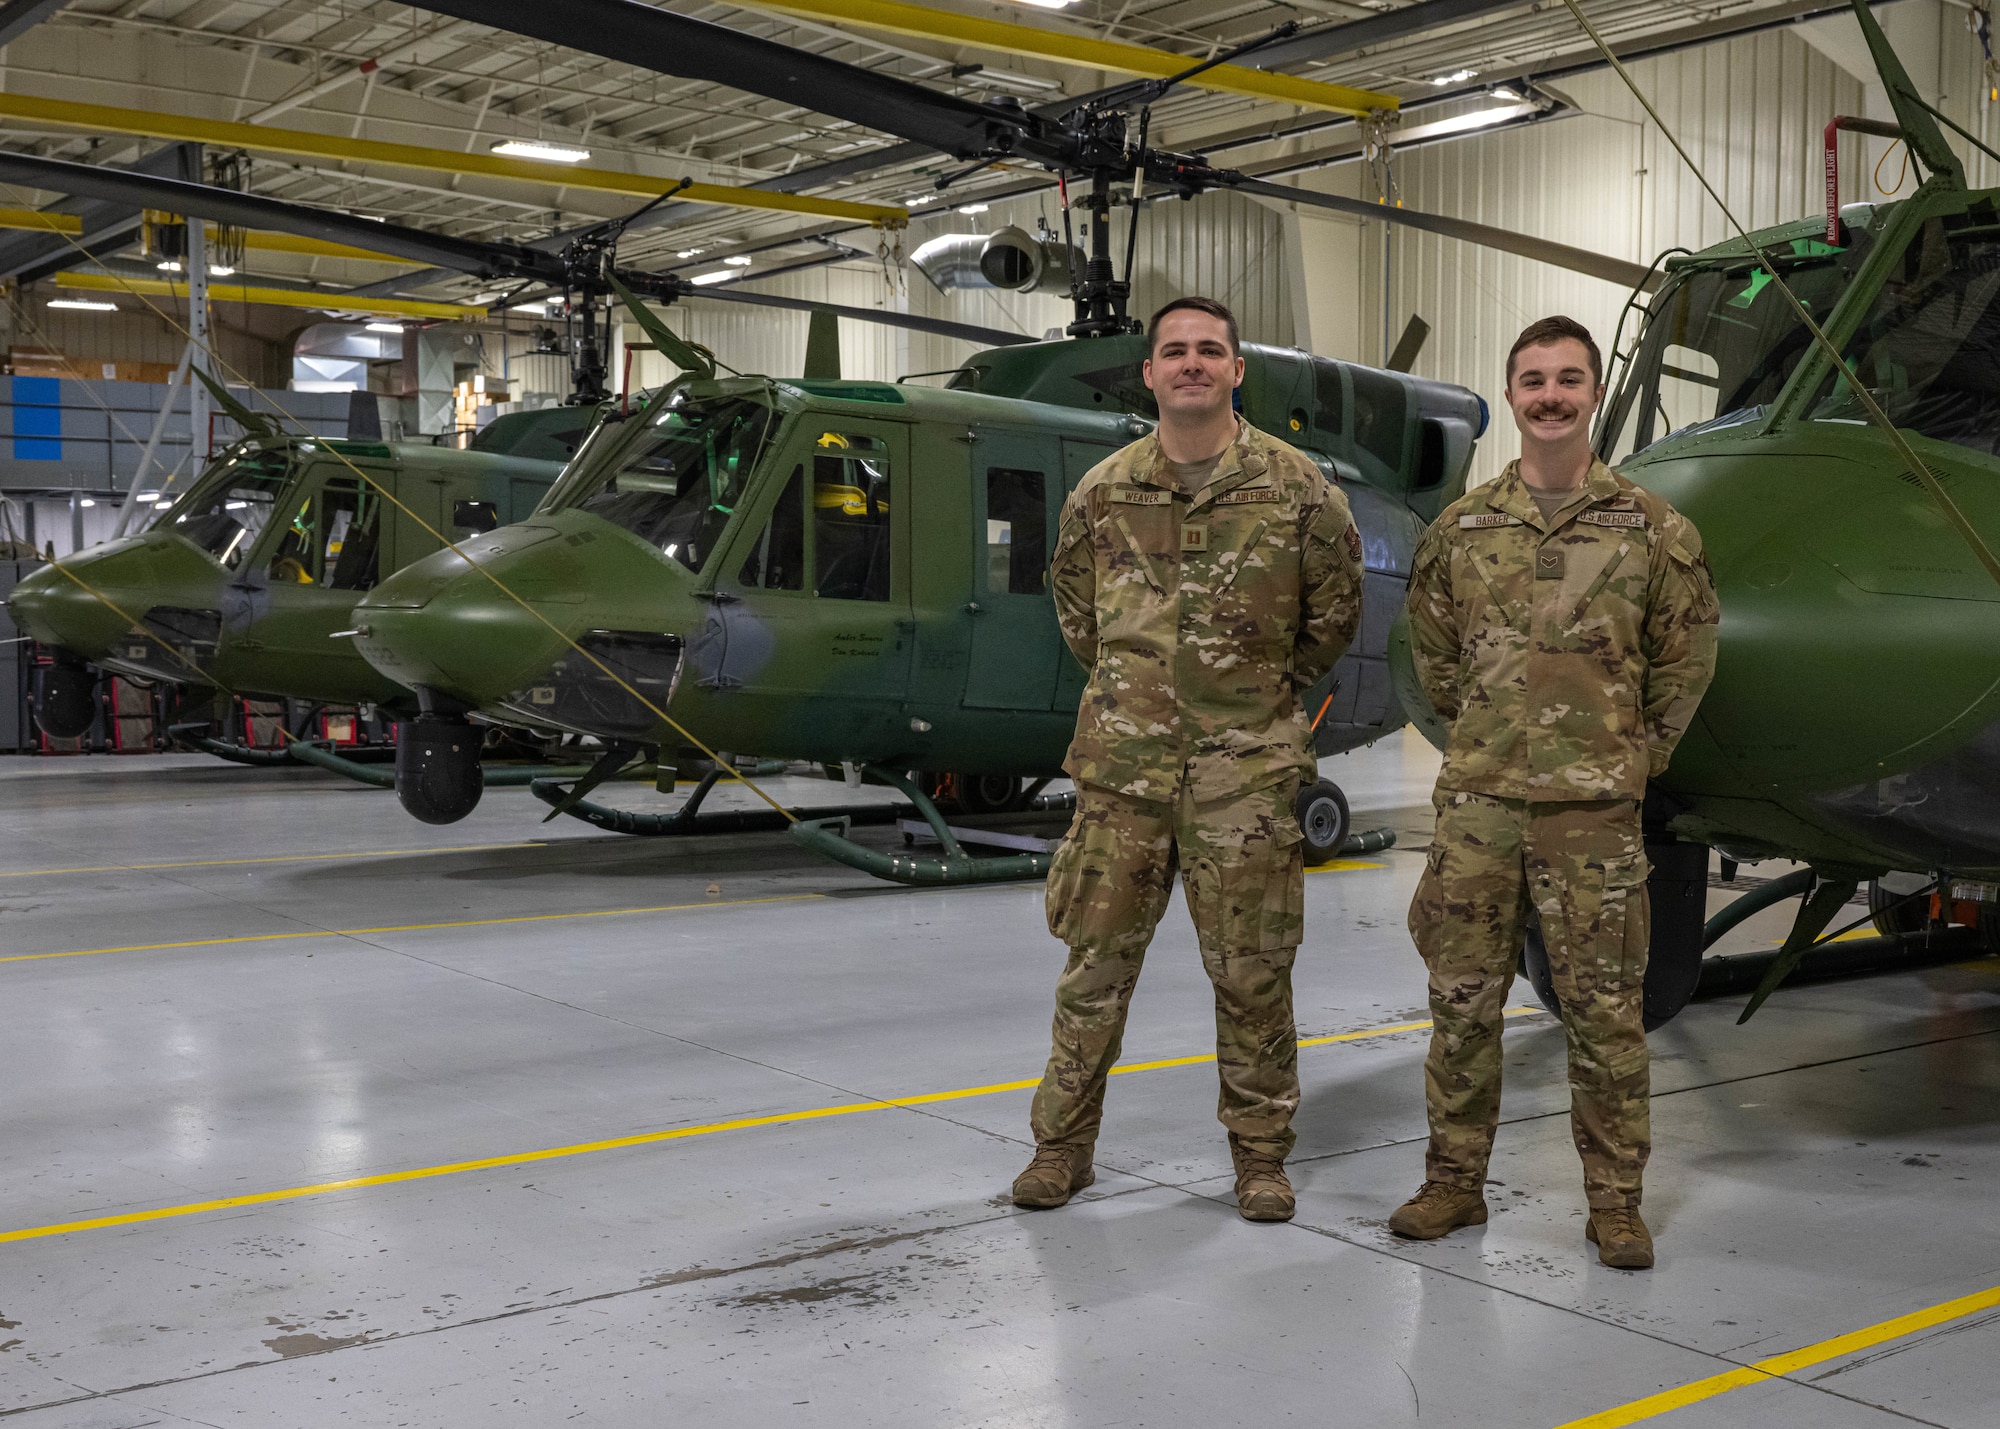 U.S. Air Force Capt. Matthew Weaver, 54th Helicopter Squadron (HS) aircraft commander (left), and Senior Airman Daniel Barker, 54th HS special missions aviator instructor, pose for a portrait at Minot Air Force Base, North Dakota, Dec. 20, 2023. The 54th HS provides integrated rapid security response capabilities to Team Minot. (U.S. Air Force photo by Airman 1st Class Kyle Wilson)